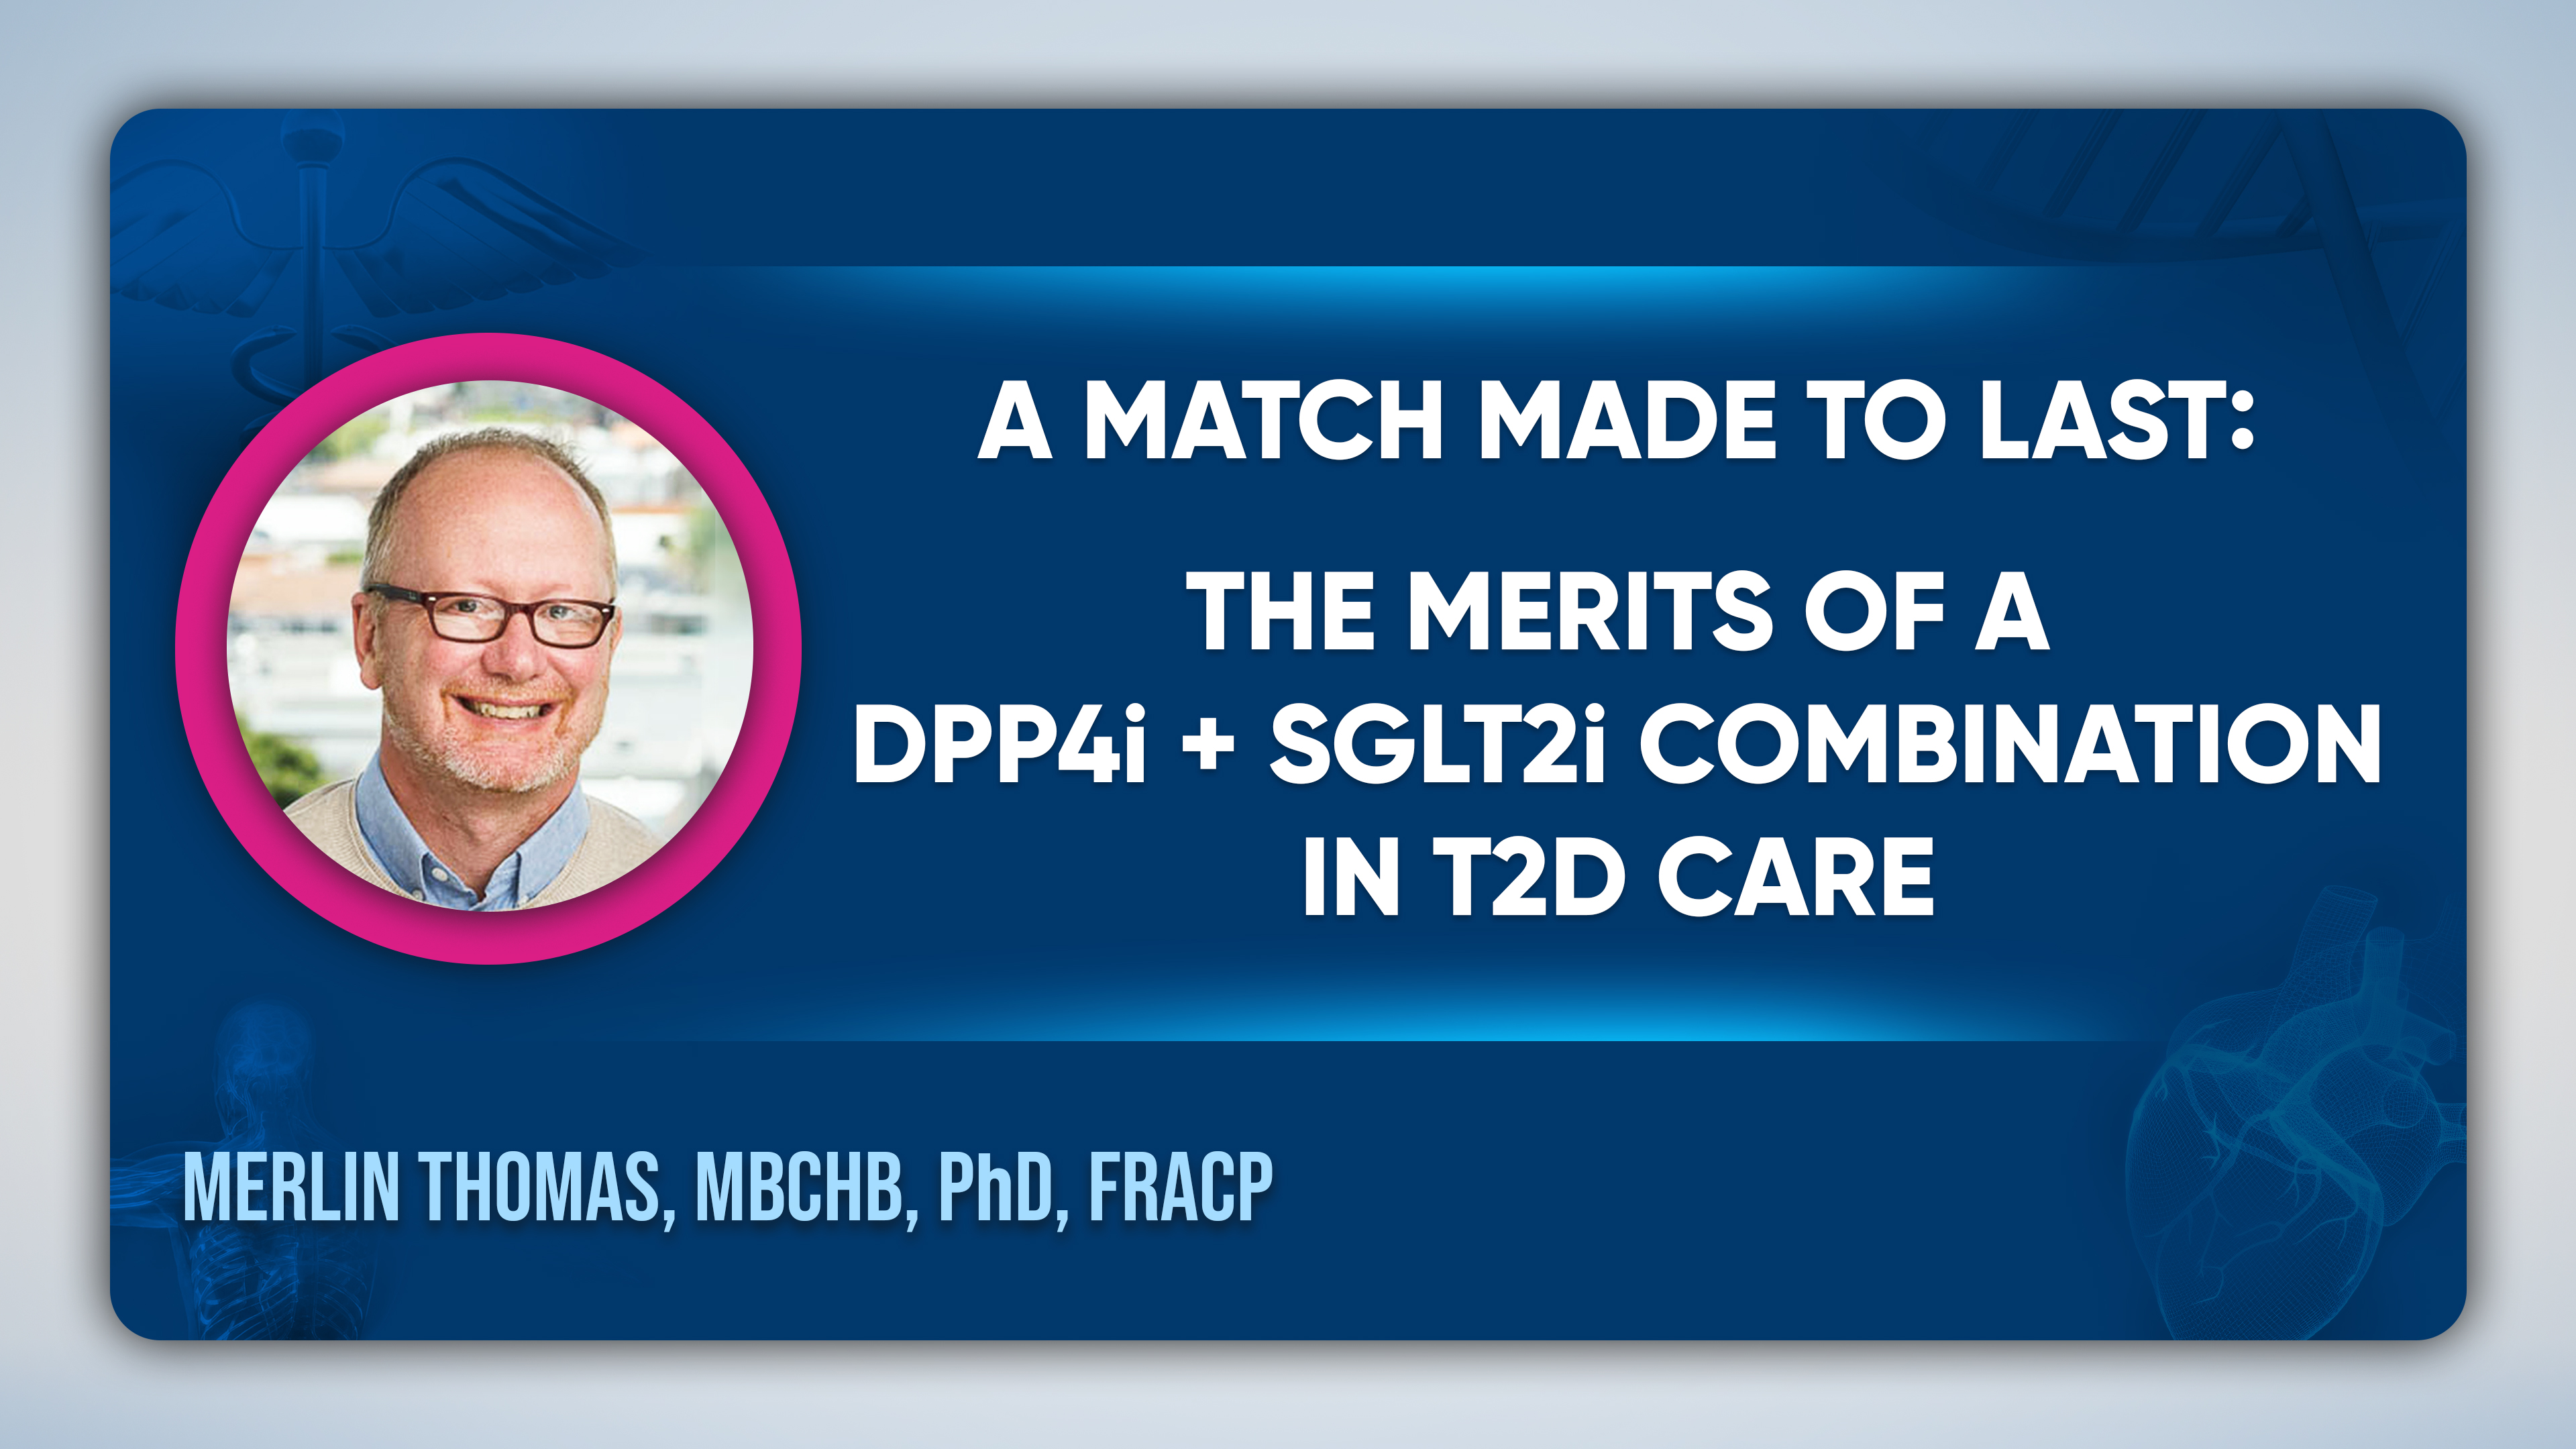 A Match Made to Last: The Merits of a DPP4i + SGLT2i Combination in T2D Care